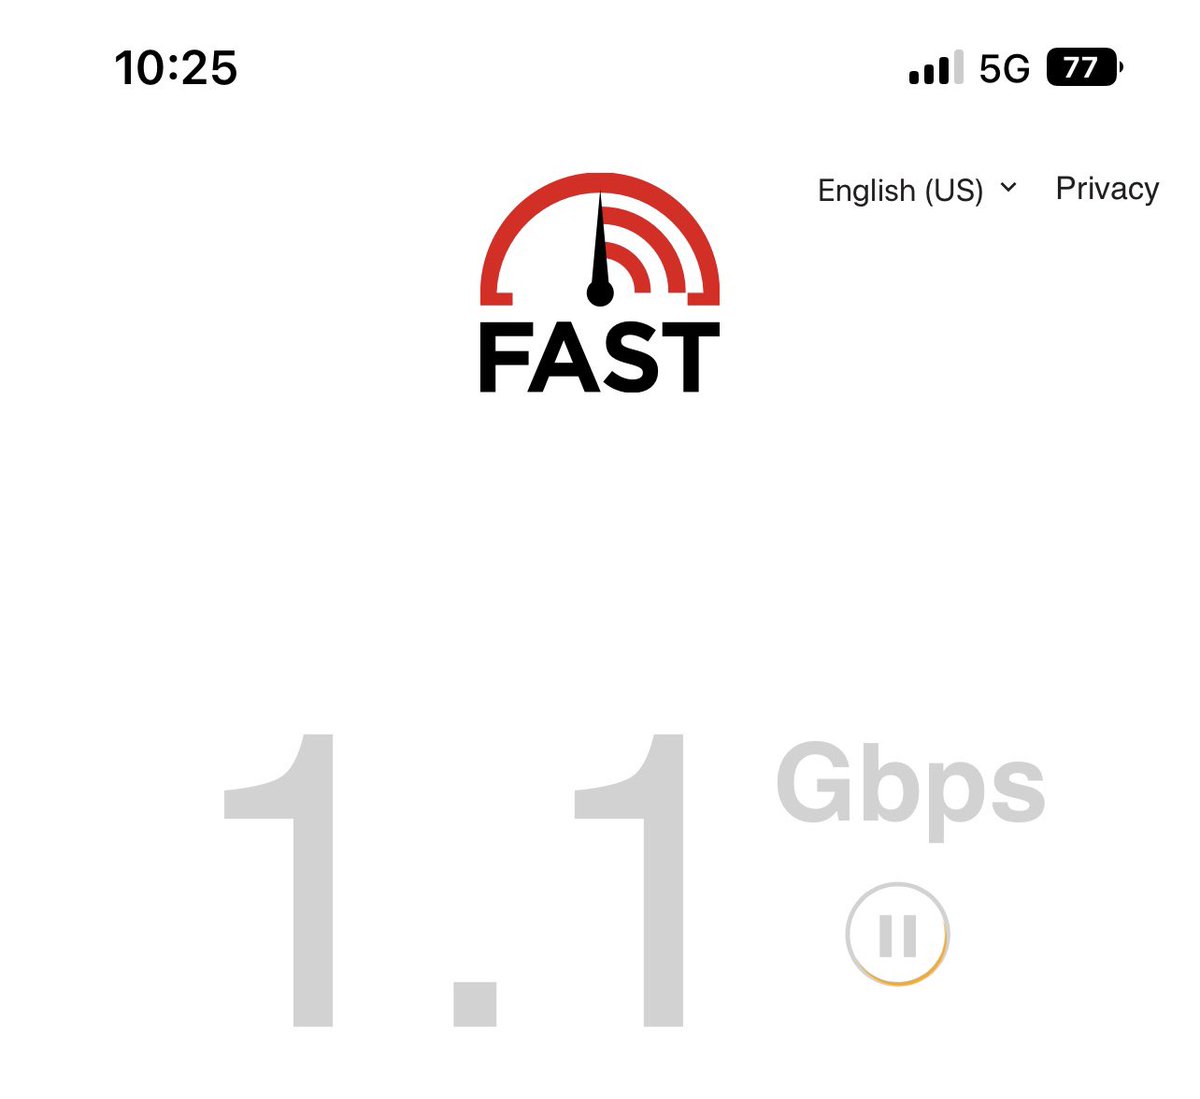 This is the speed that I am getting on 5G Vodafone sim here on Iphone 12 pro max